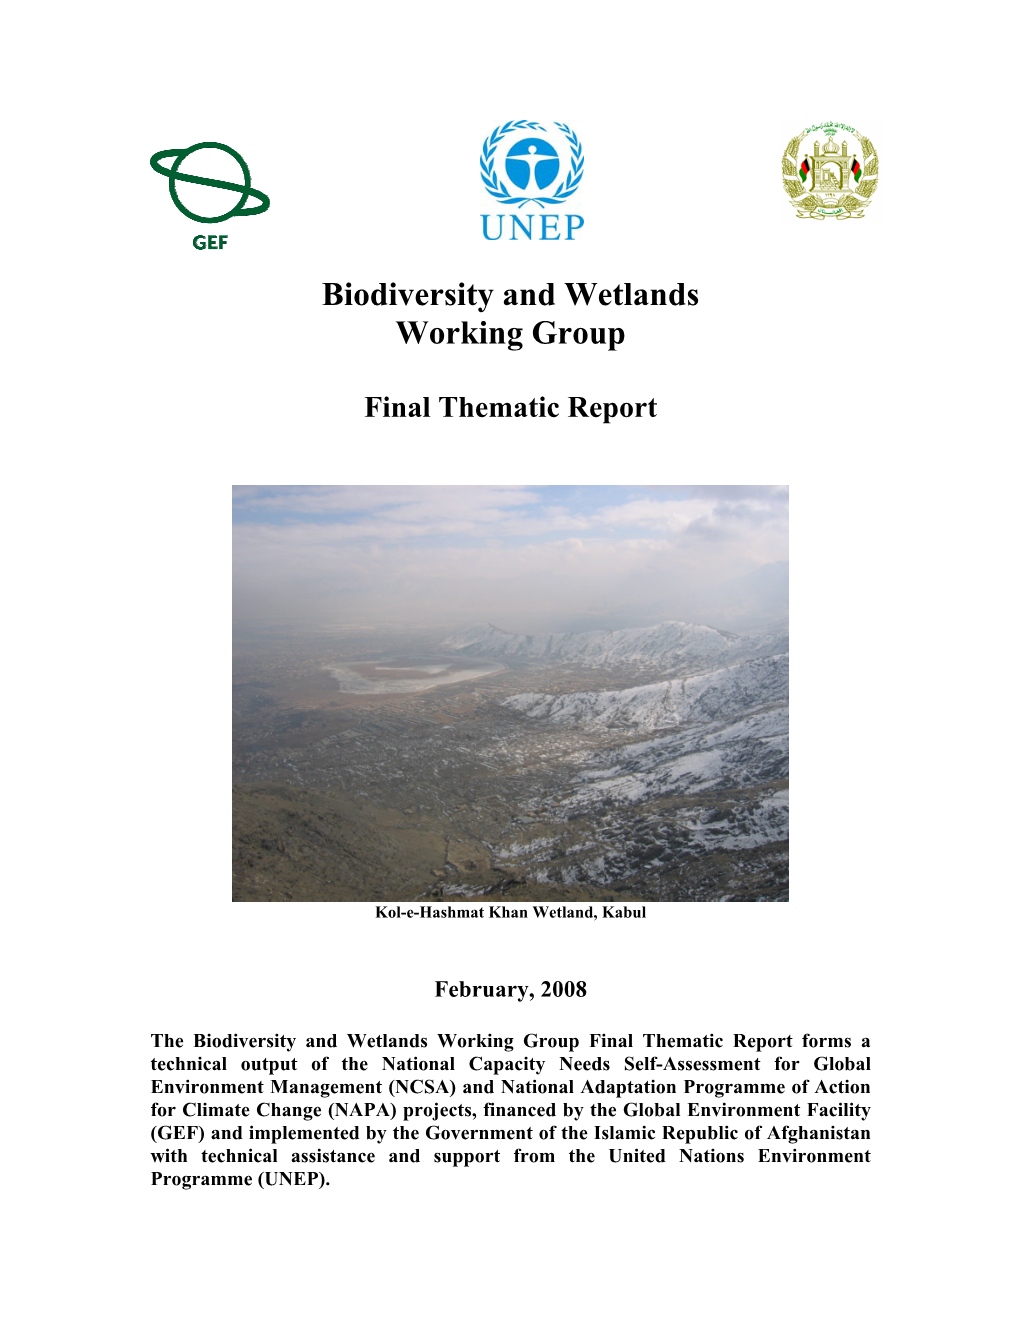 Biodiversity and Wetlands Working Group